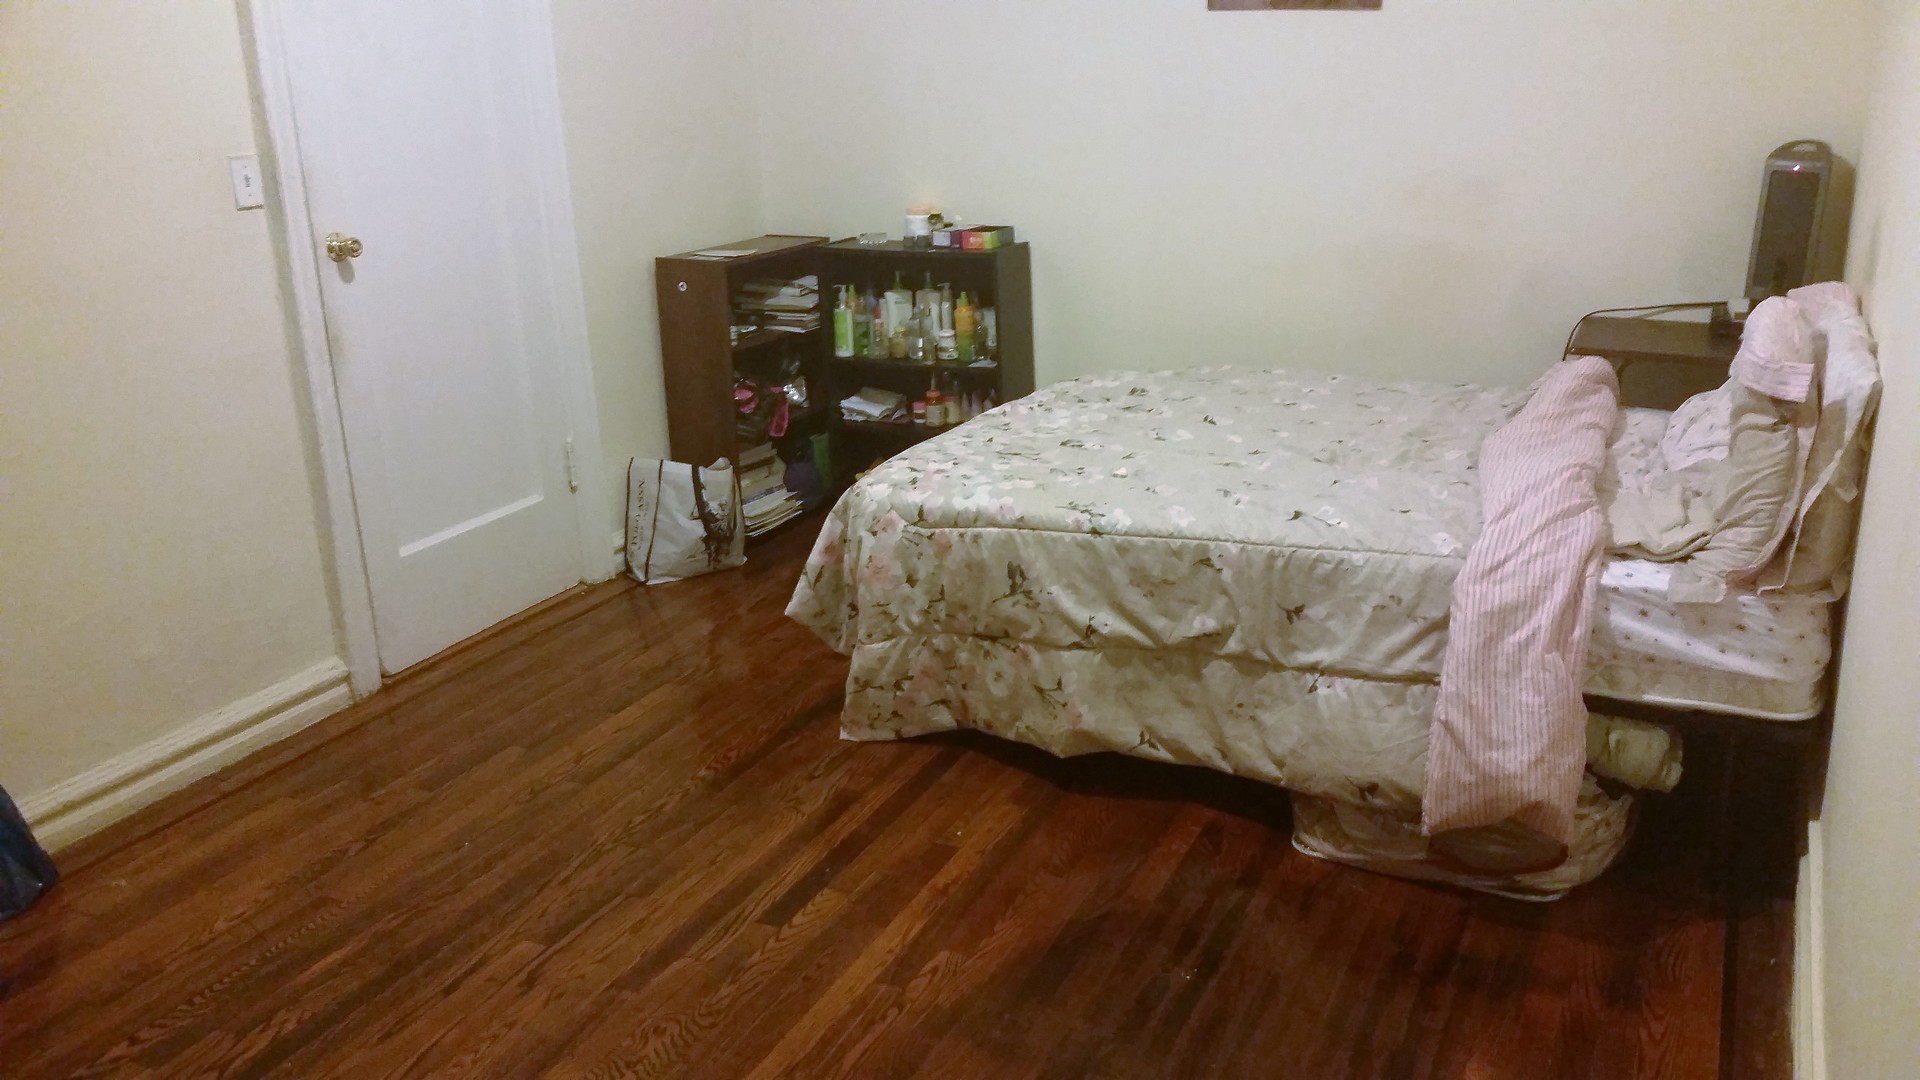 900 Huge Bedroom For Rent One Female Only Room For Rent New